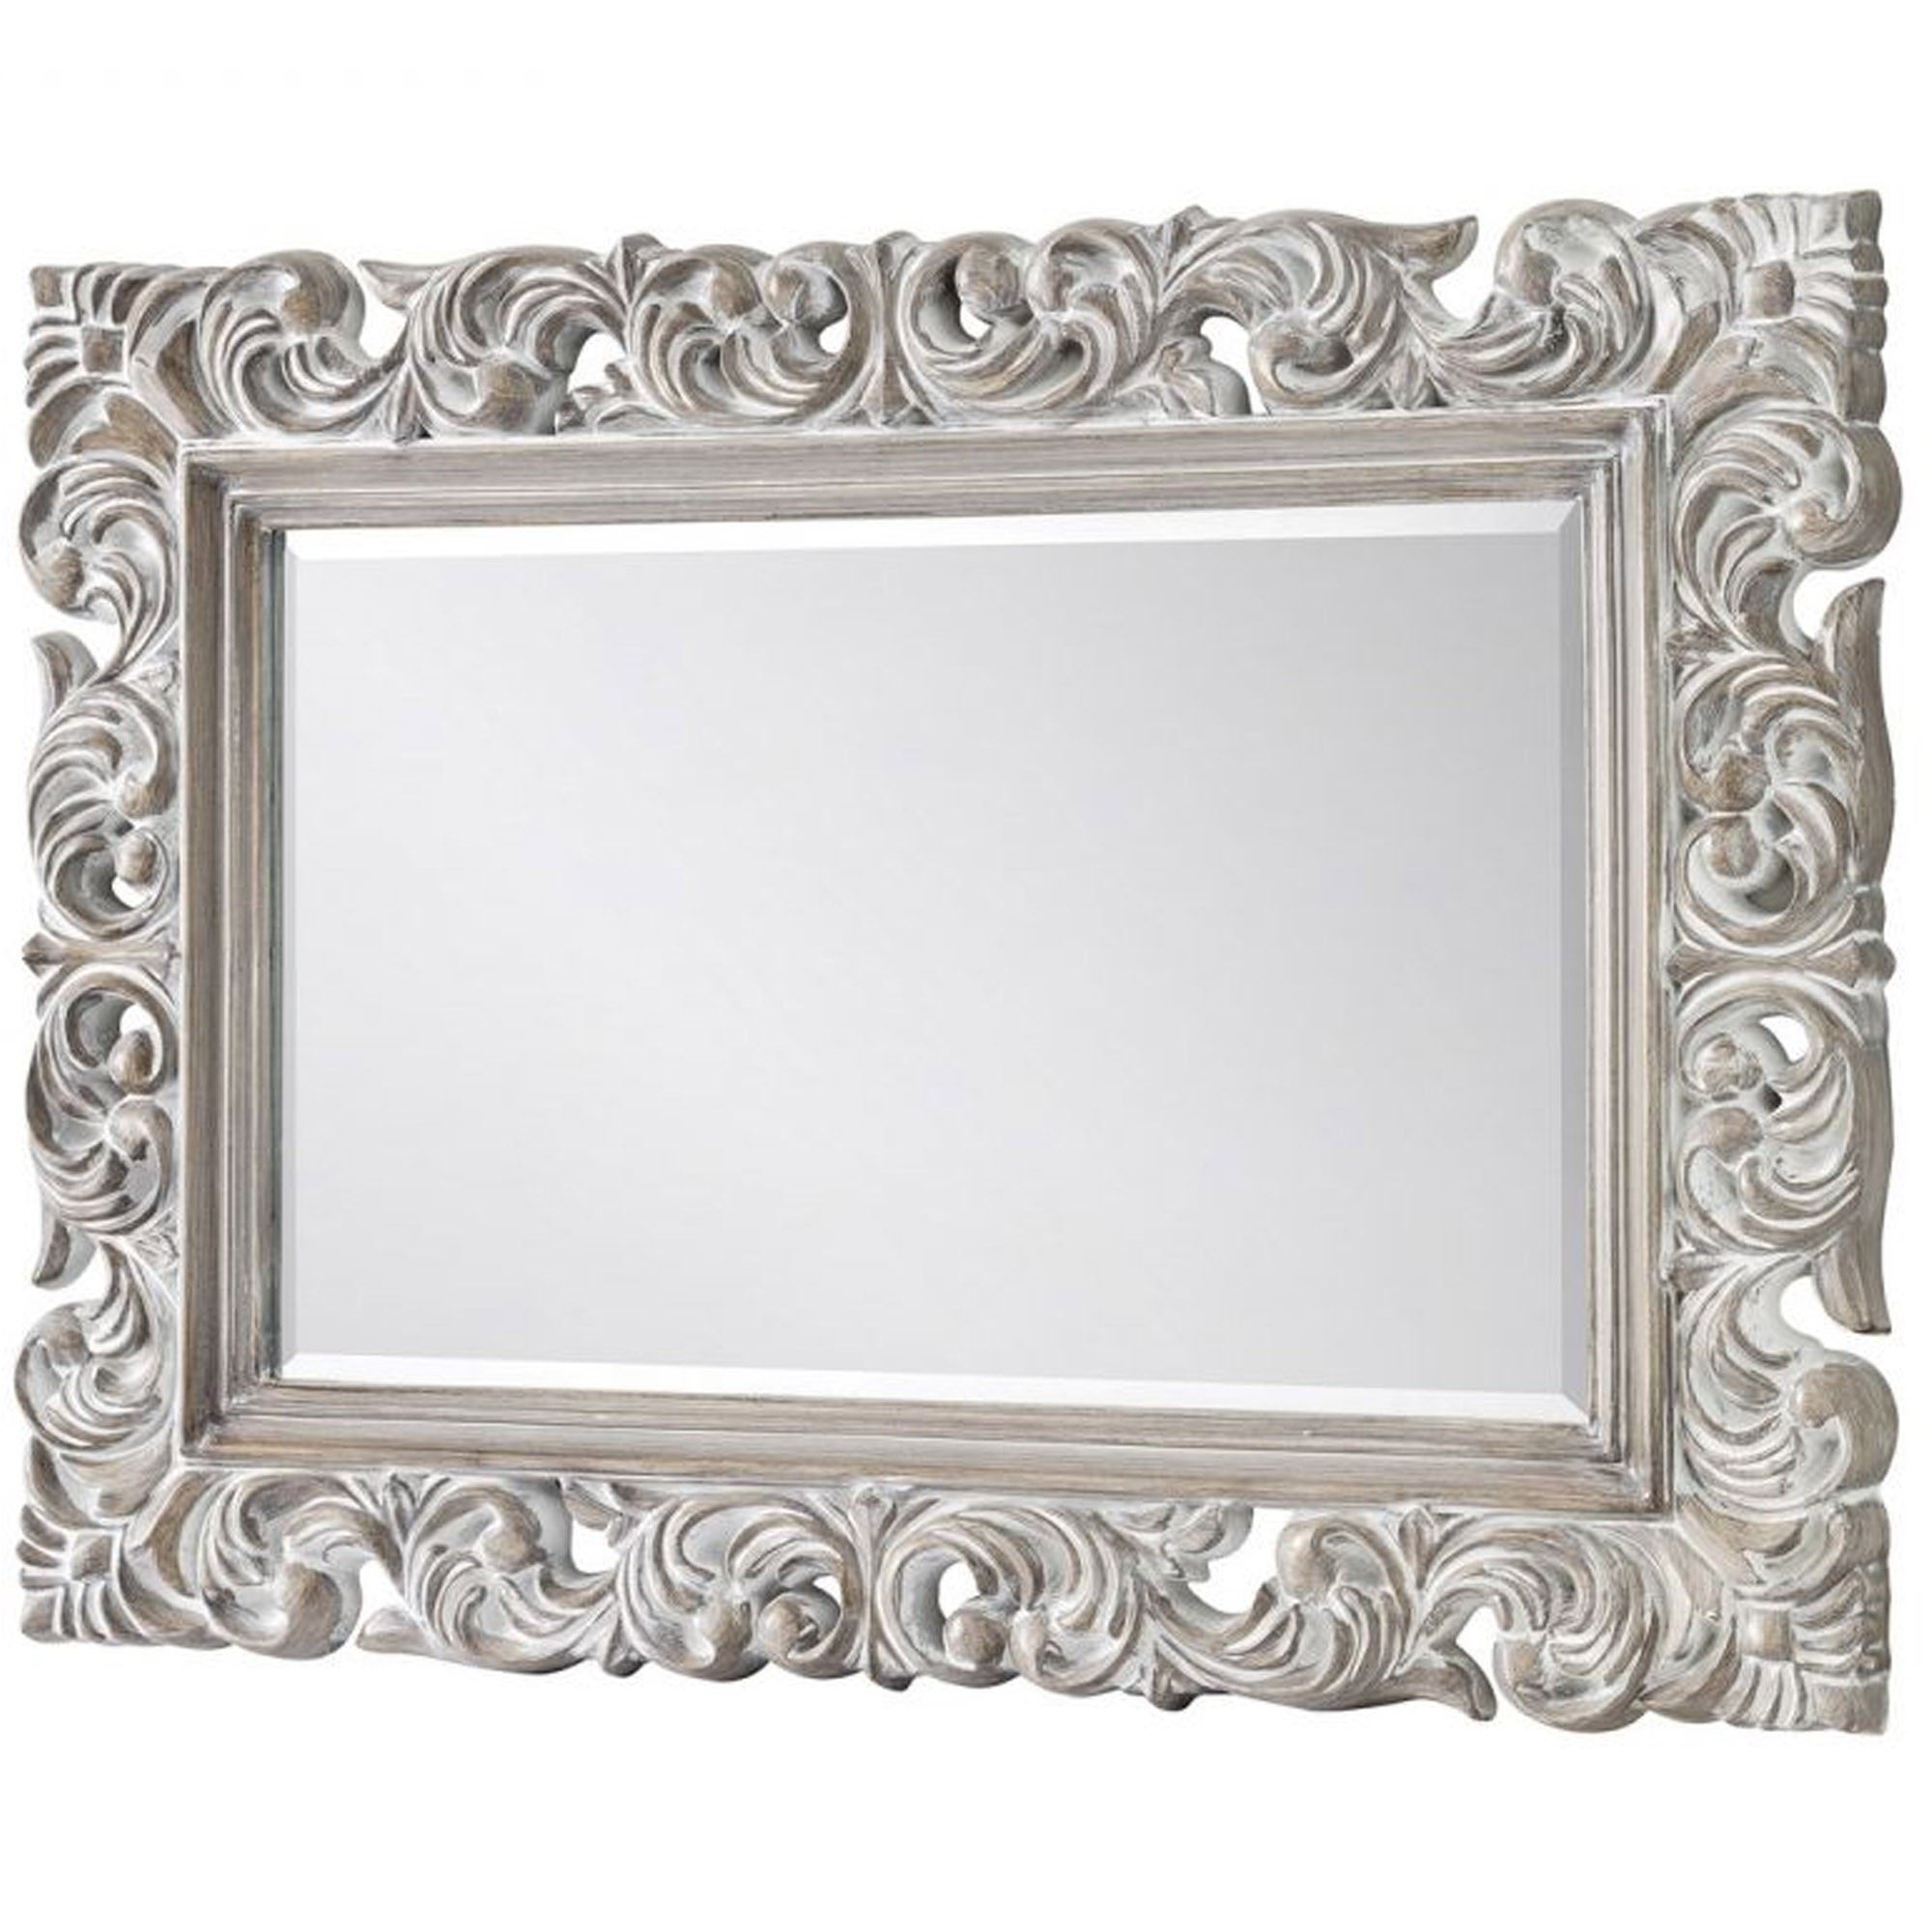 Latest Distressed Wall Mirrors With Regard To Baroque Distressed Wall Mirror (View 7 of 20)